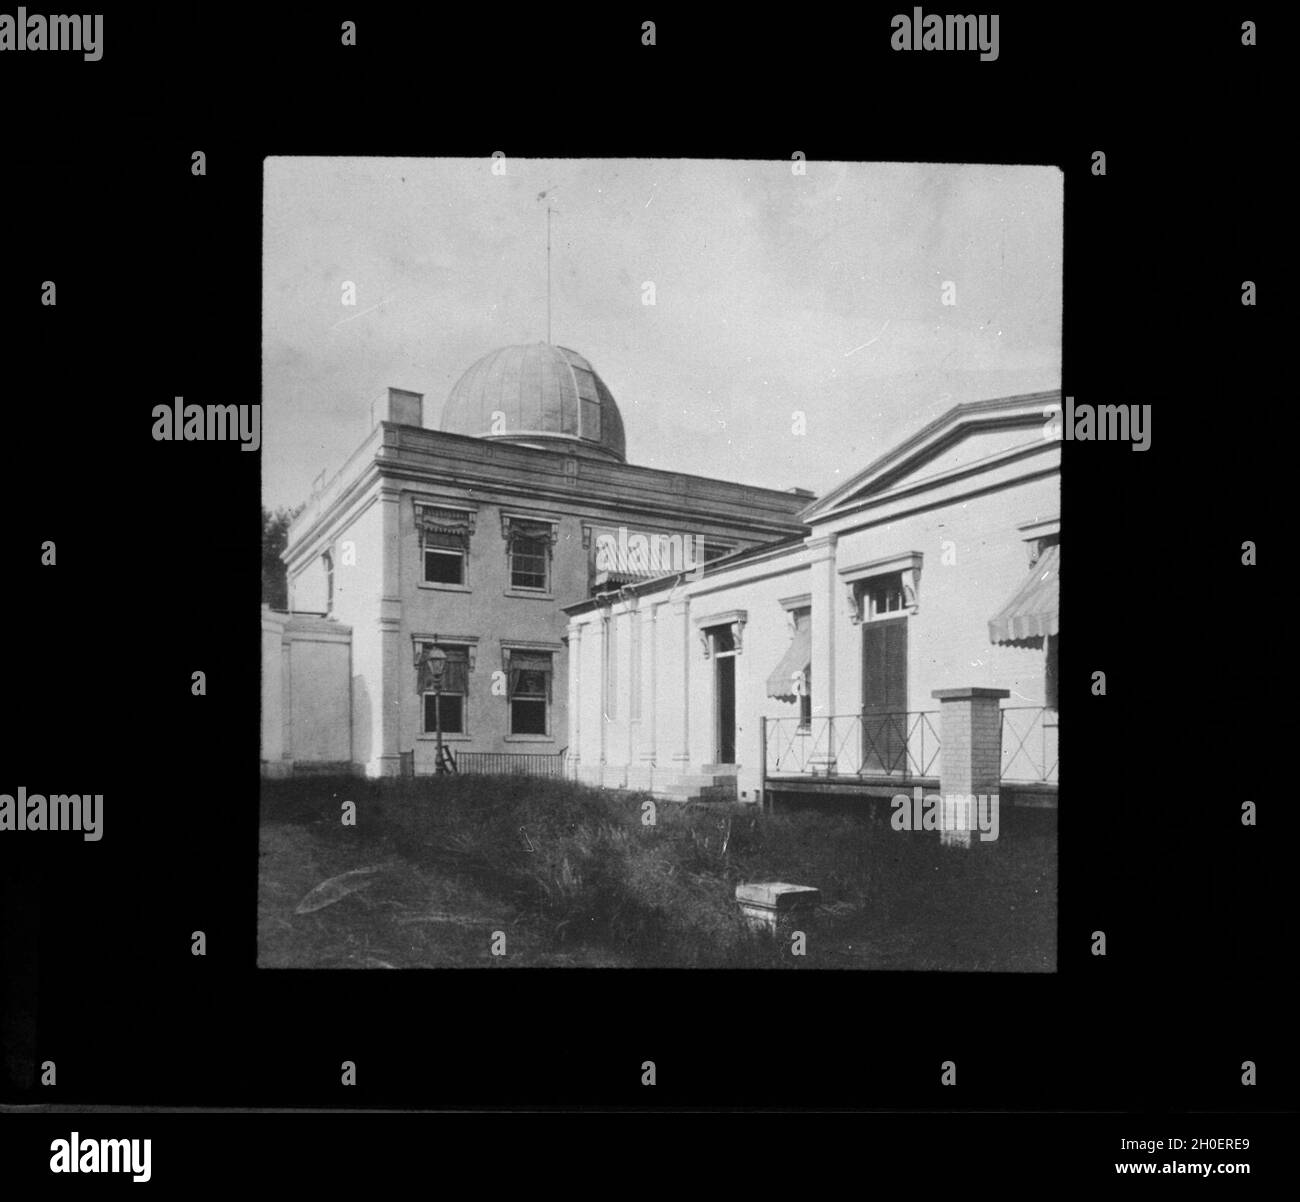 Lantern Slide 50: Old Naval Observatory looking northeast. The time ball* mast can be seen on top of the 9.6-inch refractor dome. *Not used at Obs. After 1884, but at old State, War, & Navy Bldg. The wing to the south (right) housed the prime vertical (lantern slide #137). It also contained a storeroom and, after 1873, office space and the 26-inch refractor. The wing also housed for a time a 6.6-inch refraction circle (1848 – 1861). Photograph about 1888. The Frodsham clock, in the Observatory lobby now, was used in the prime vertical room from about 1850 to 1882 when it was replaced by Howard Stock Photo